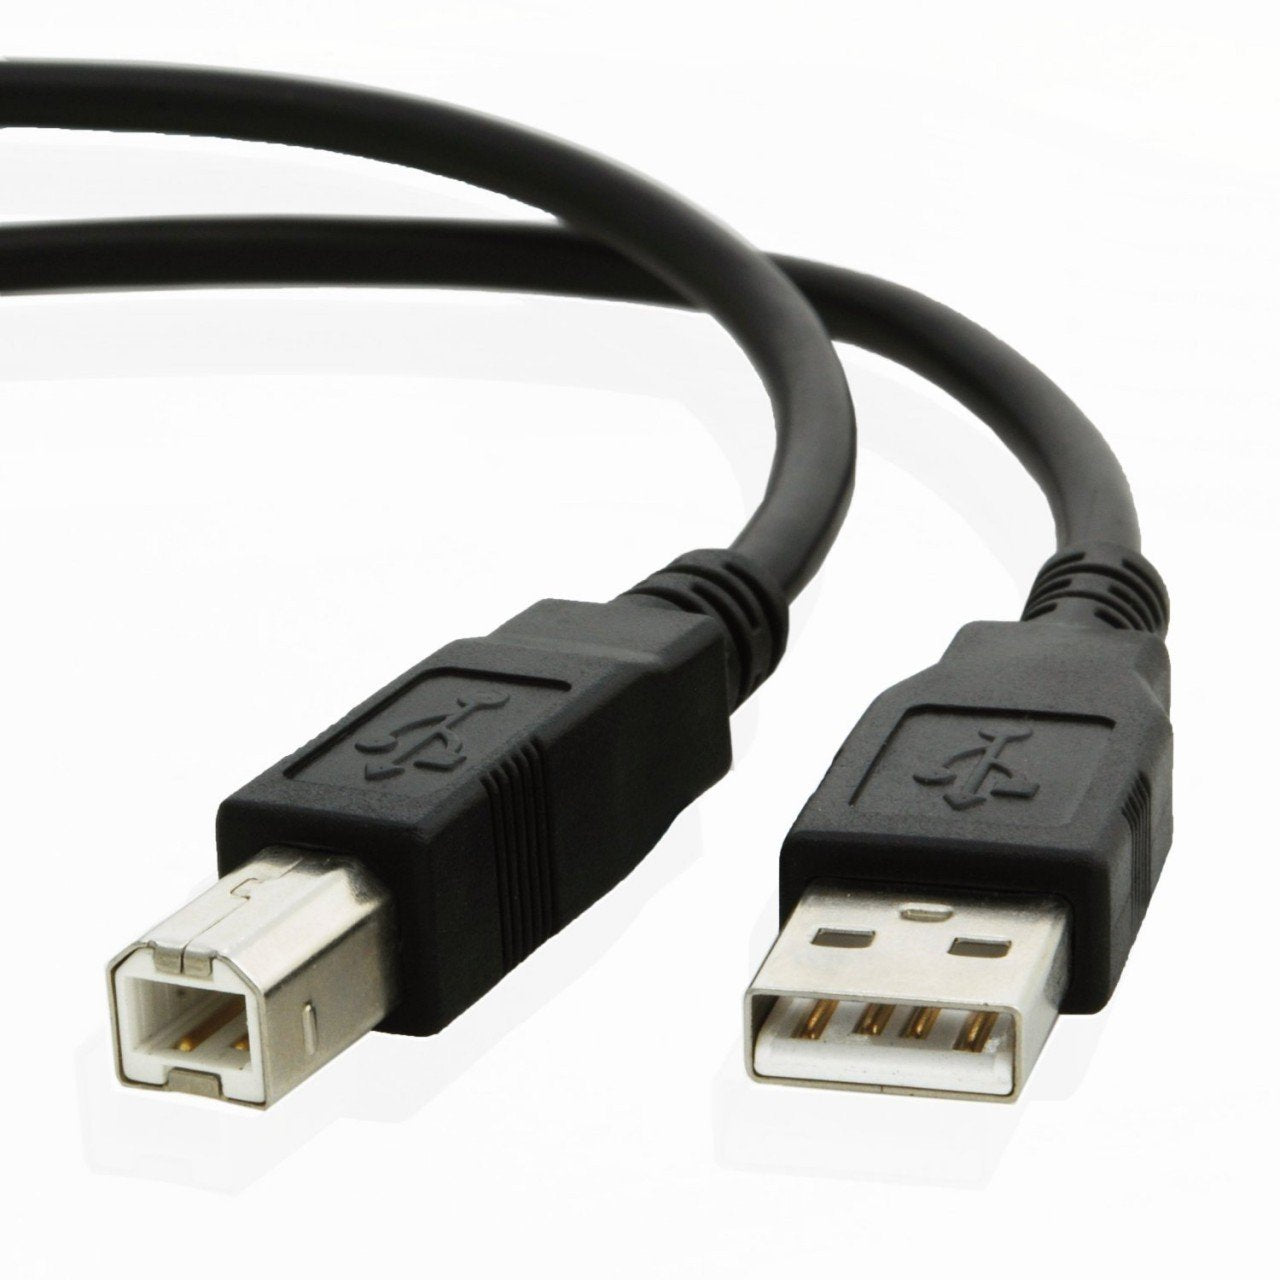 USB cable for Roland DIGITAL PIANO RD-2000